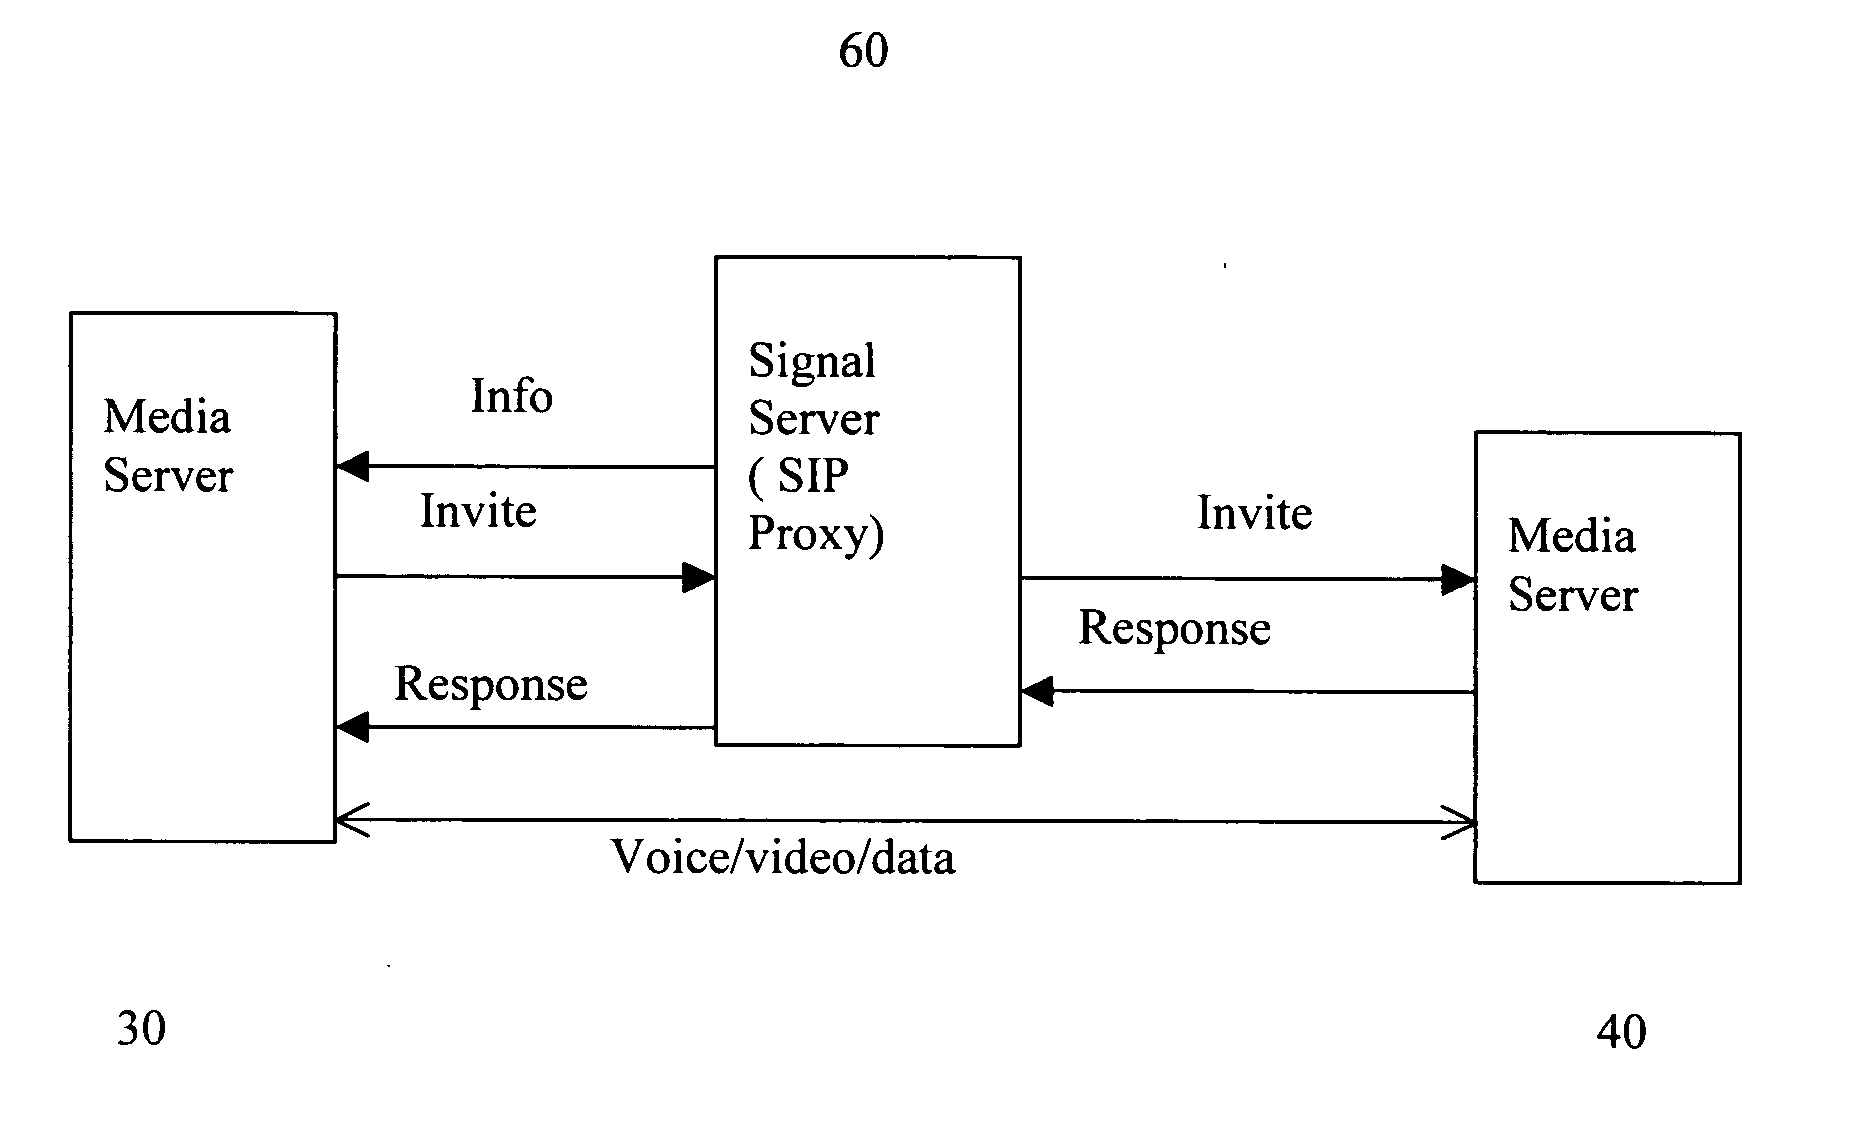 Method to allow voice, video and data conference with minimum bandwidth consumption between two or more geological locations and achieve quality of service (QoS) and scalability